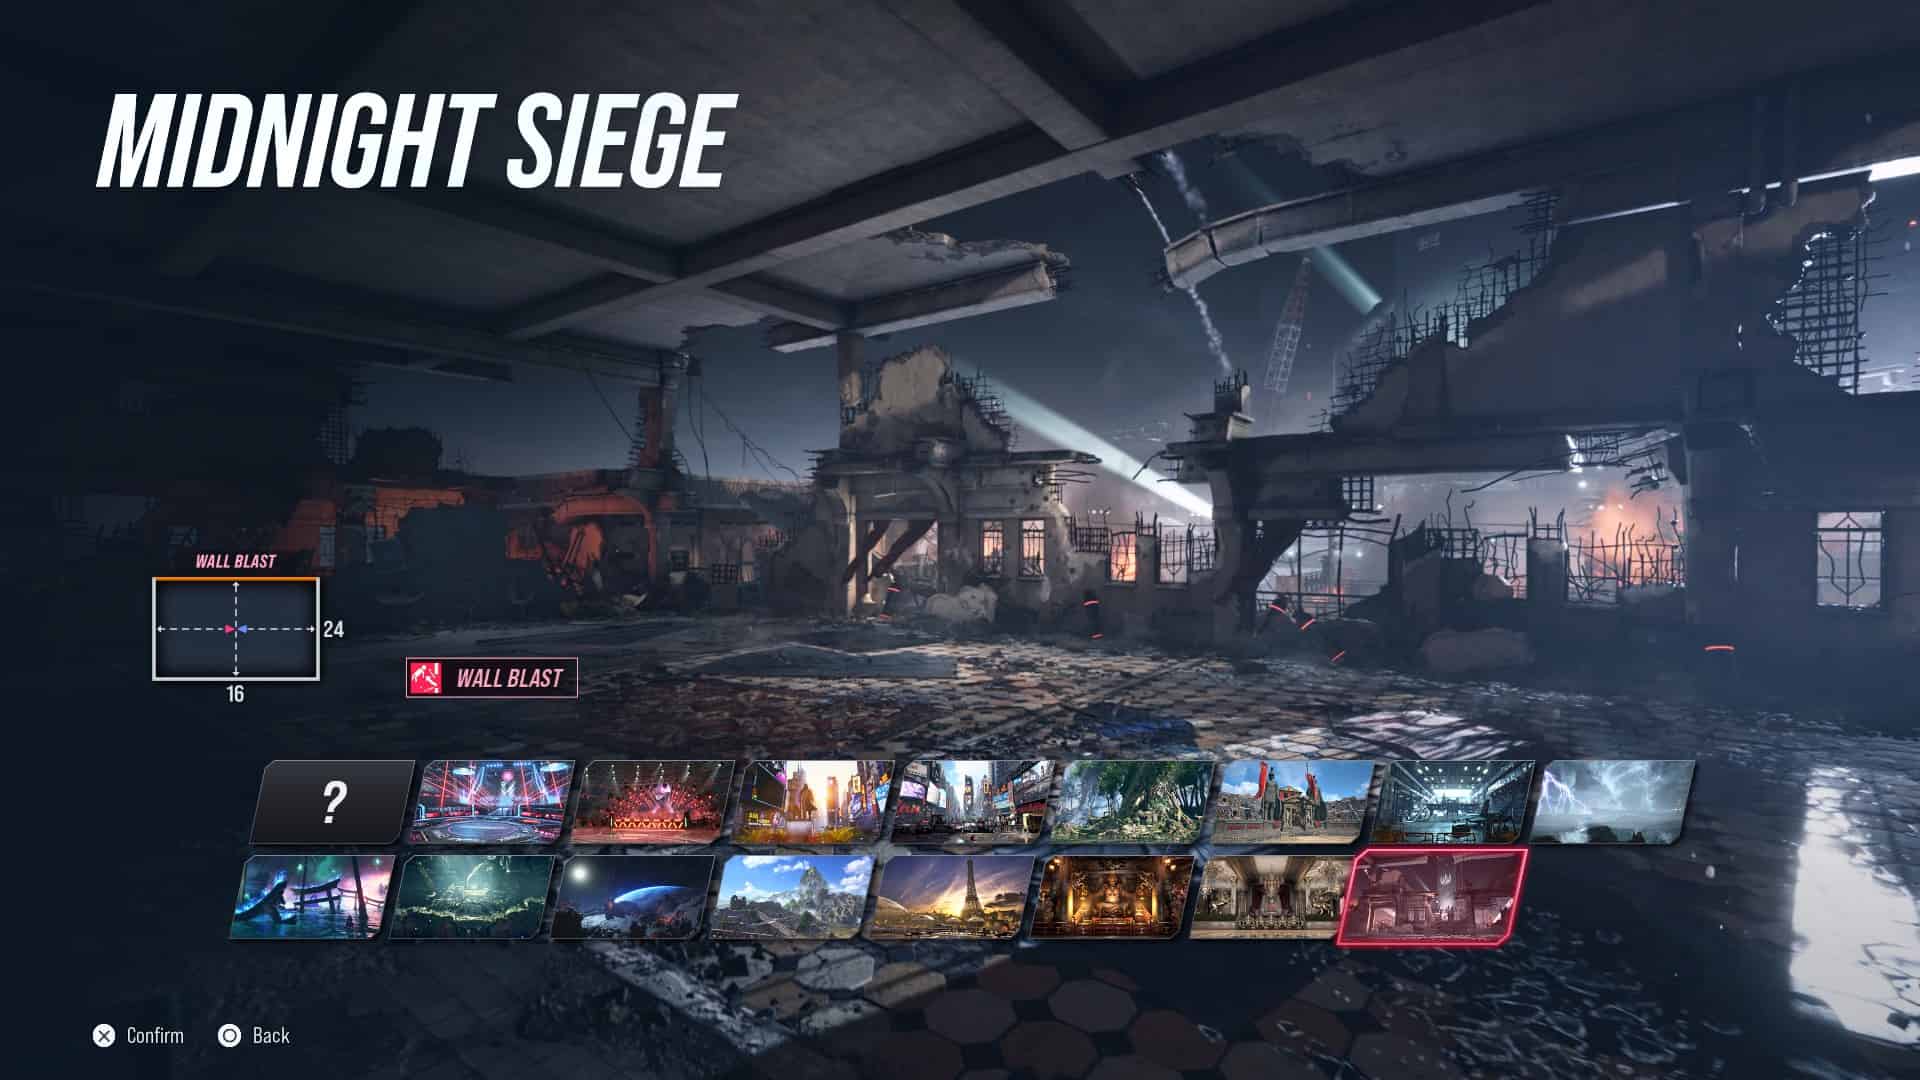 Tekken 8 stages: The Midnight Siege stage in the stage select screen